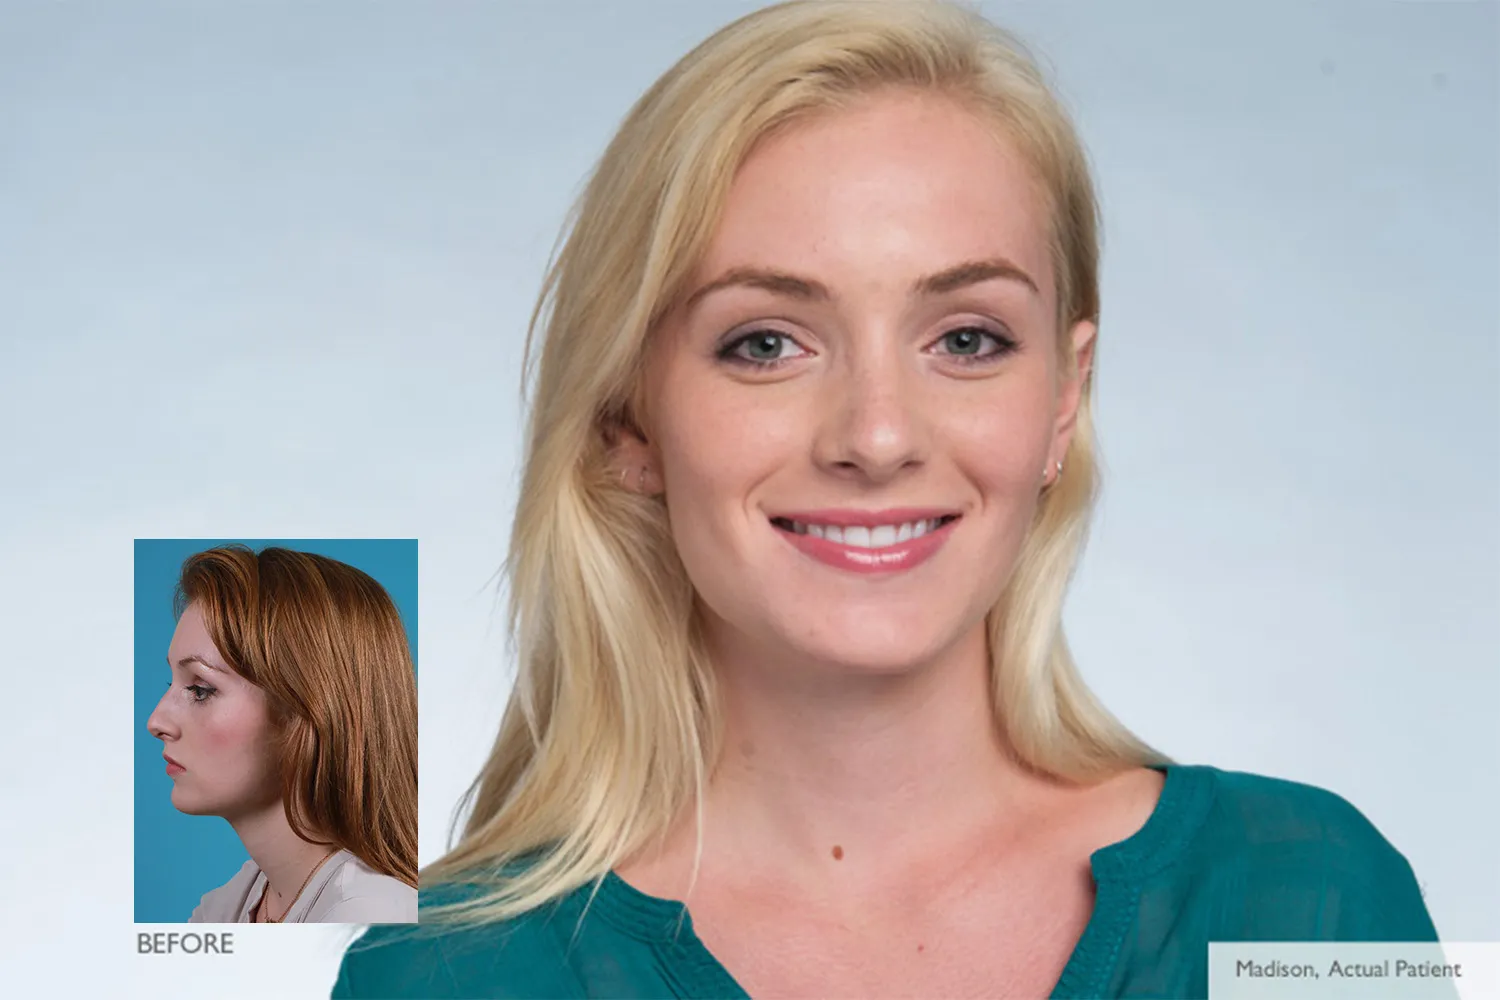 Before and After Rhinoplasty treatment | Rawnsley Plastic Surgery in Los Angeles, CA